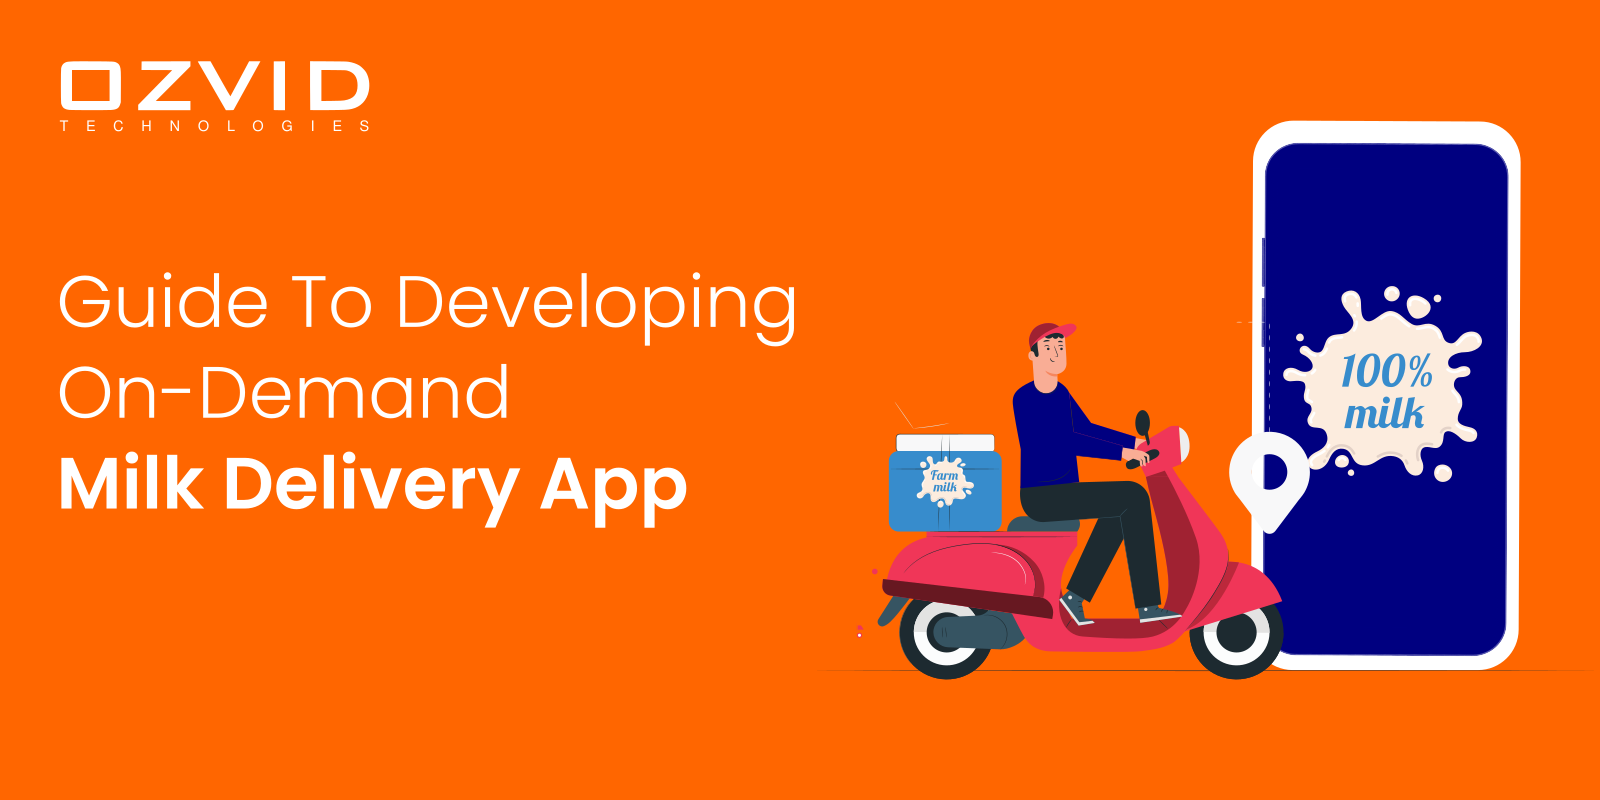 A Step-by-step Guide To Developing On-demand Milk Delivery App Like Milkbasket